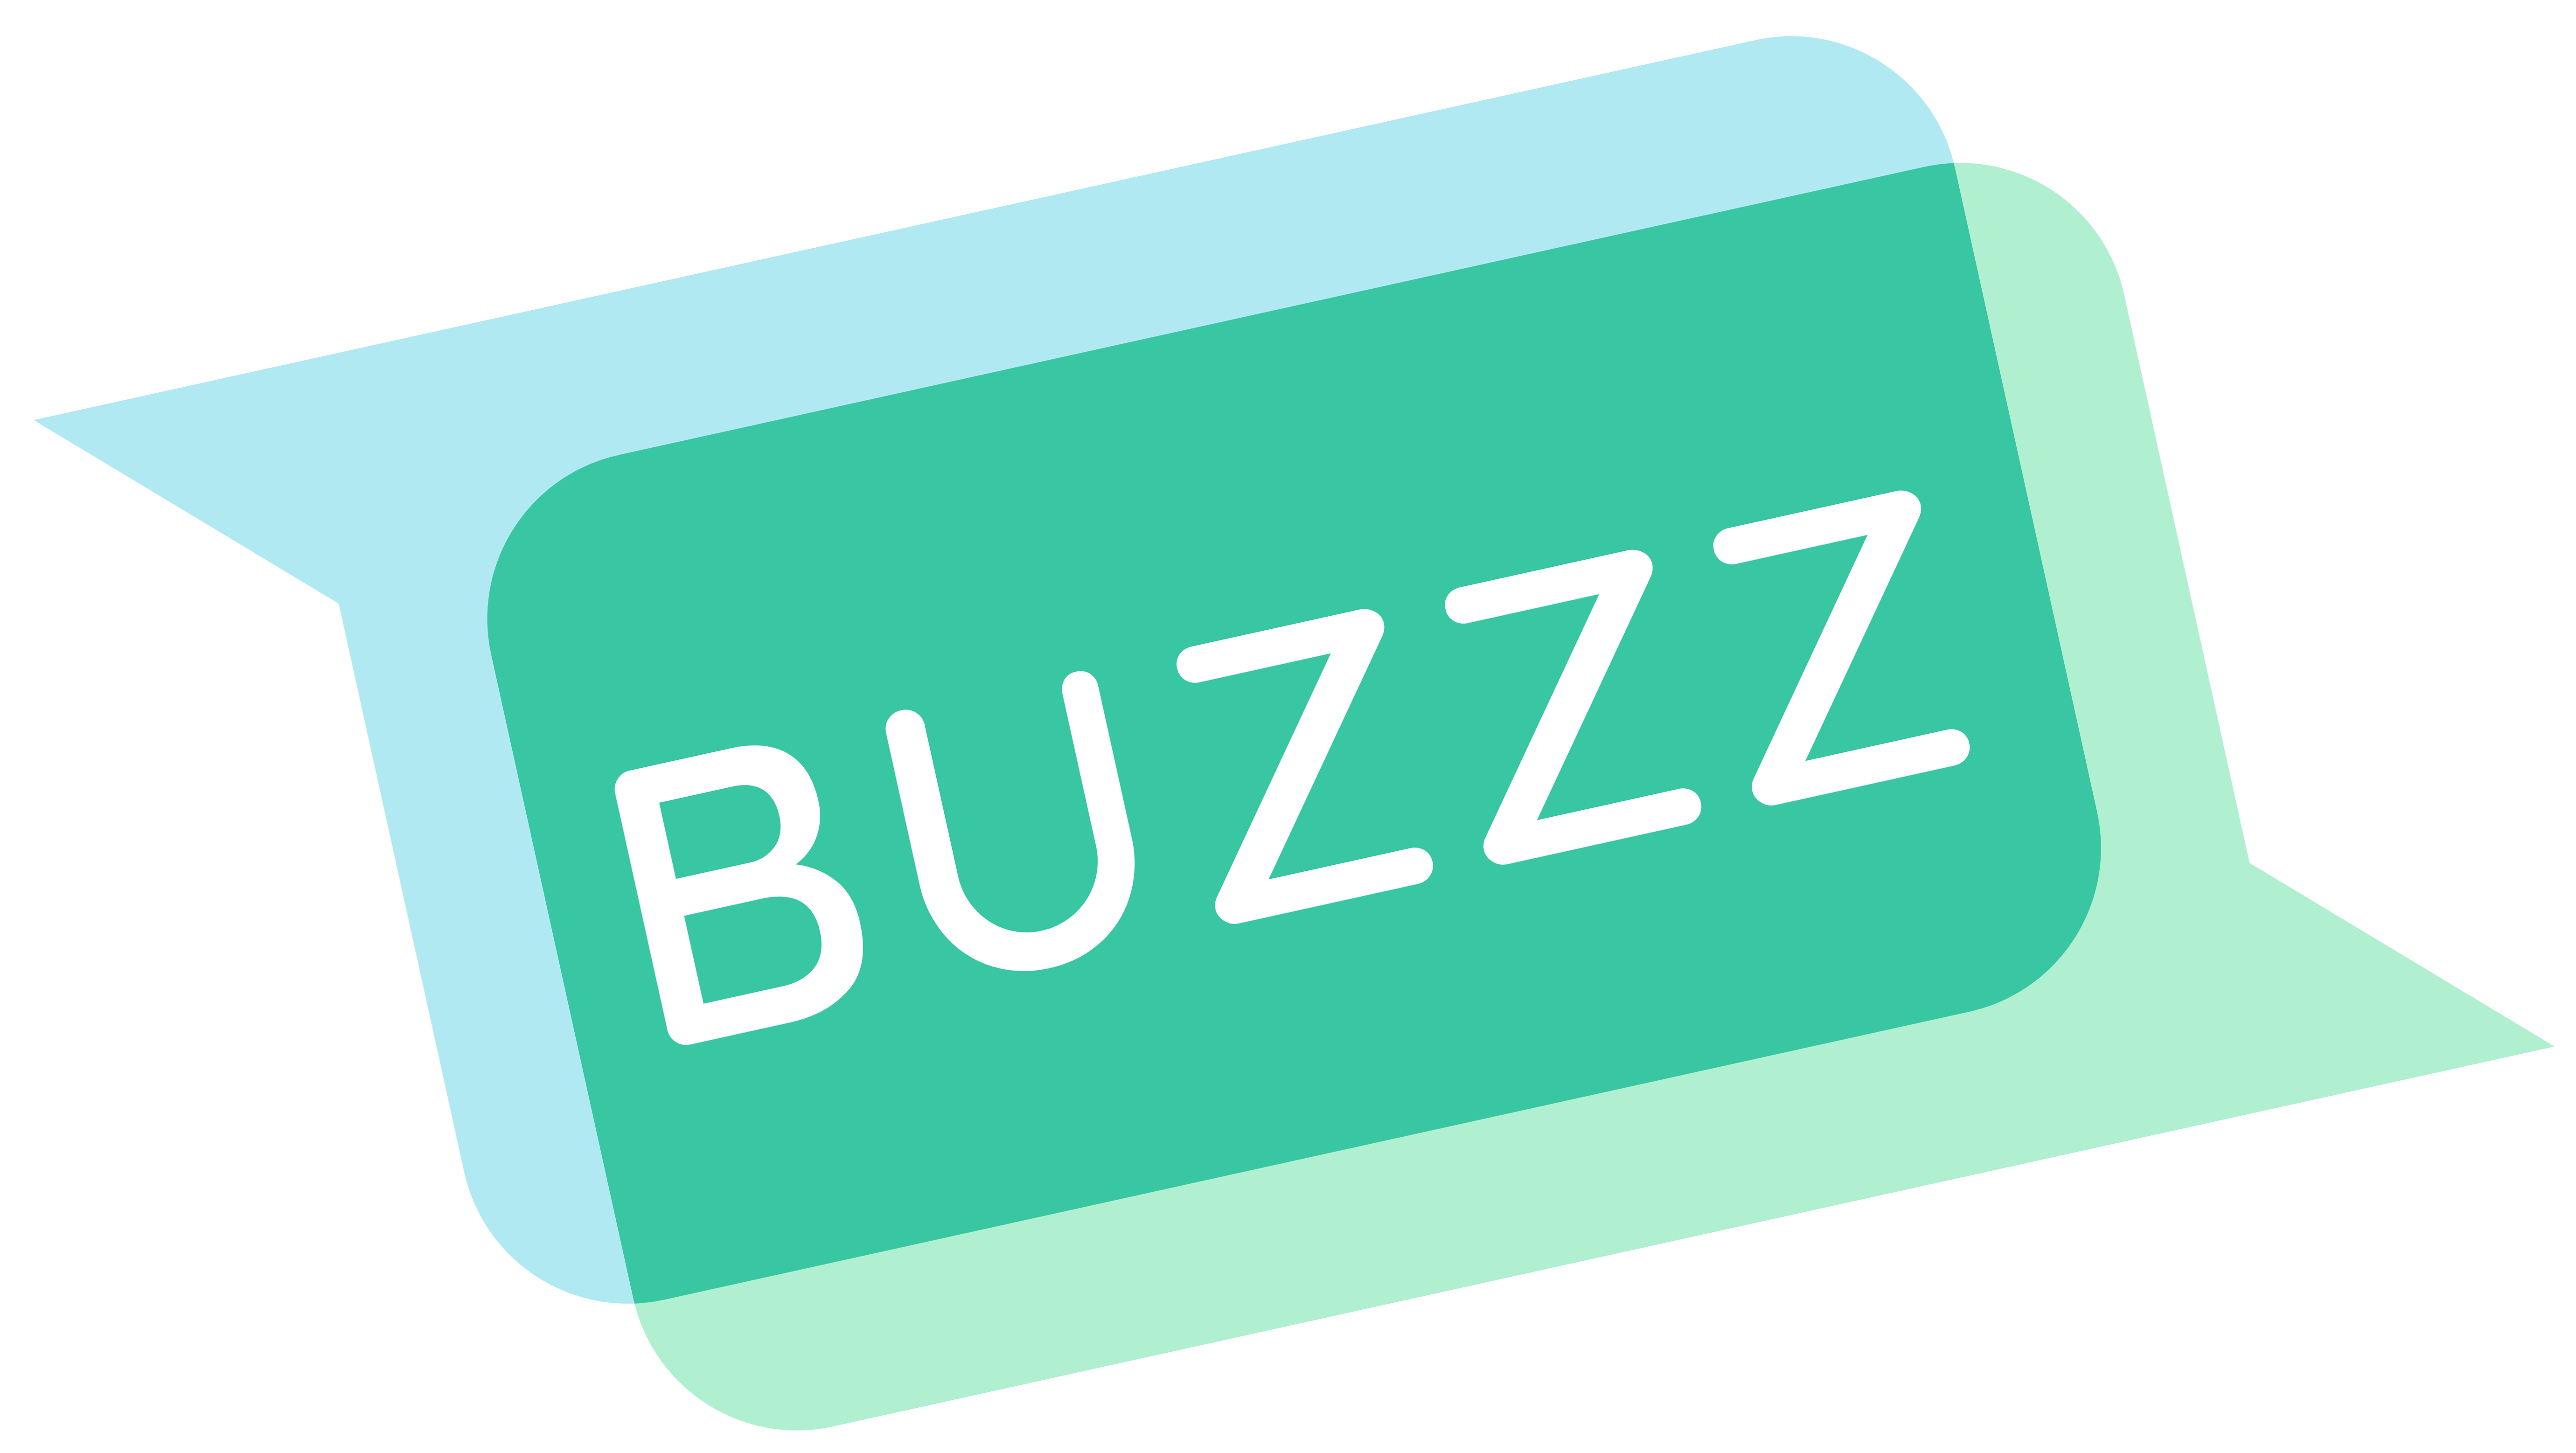 Logo of the new s2G.at communication software "Buzzz".